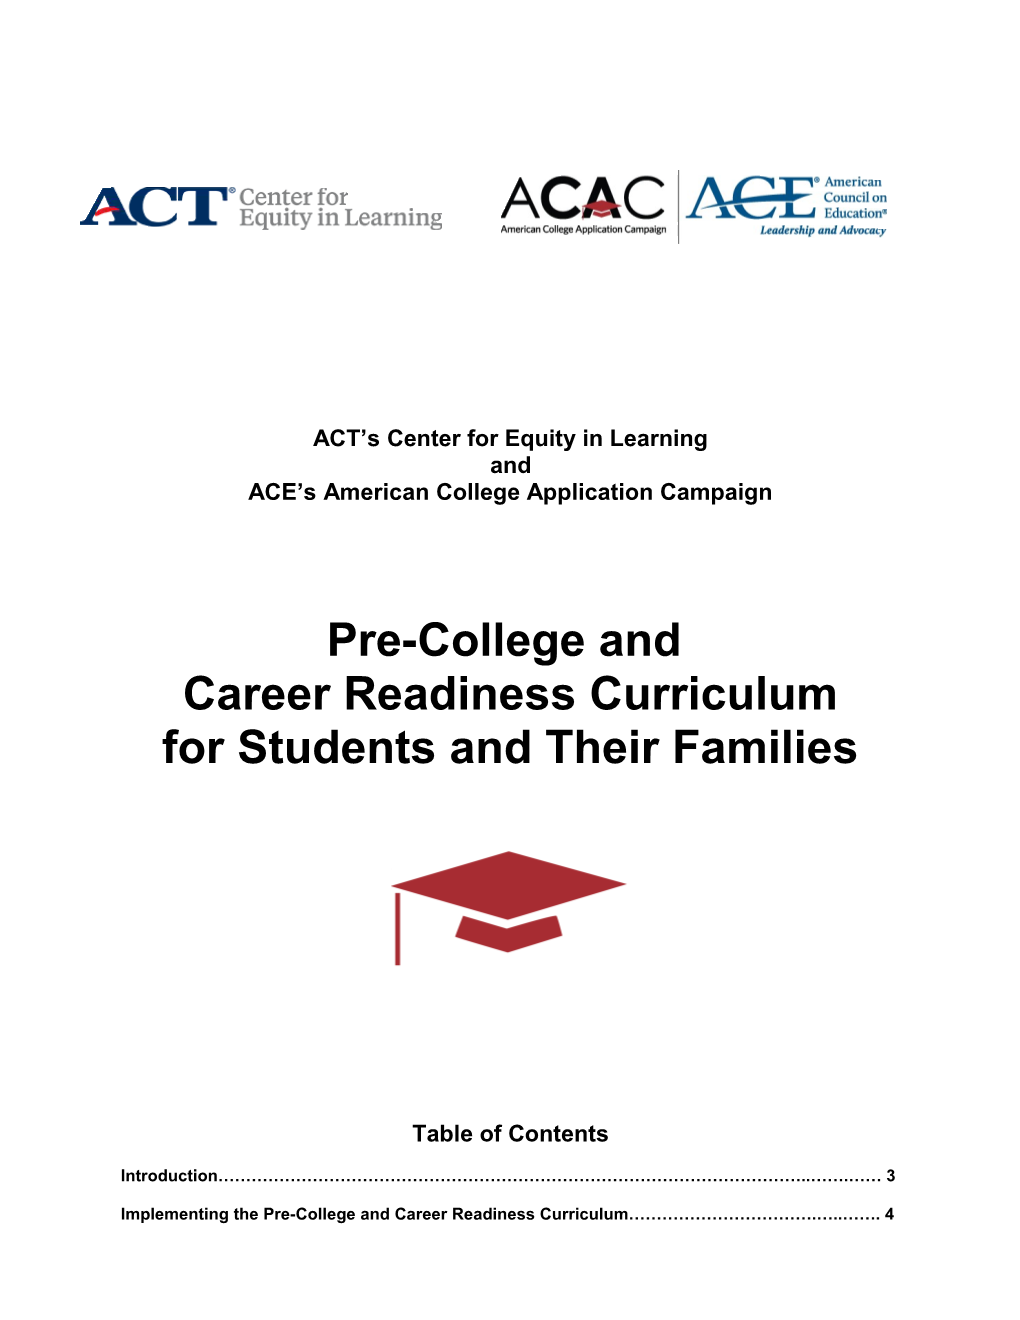 2017 Pre-College and Career Readiness Curriculum for Students and Their Families (Revised